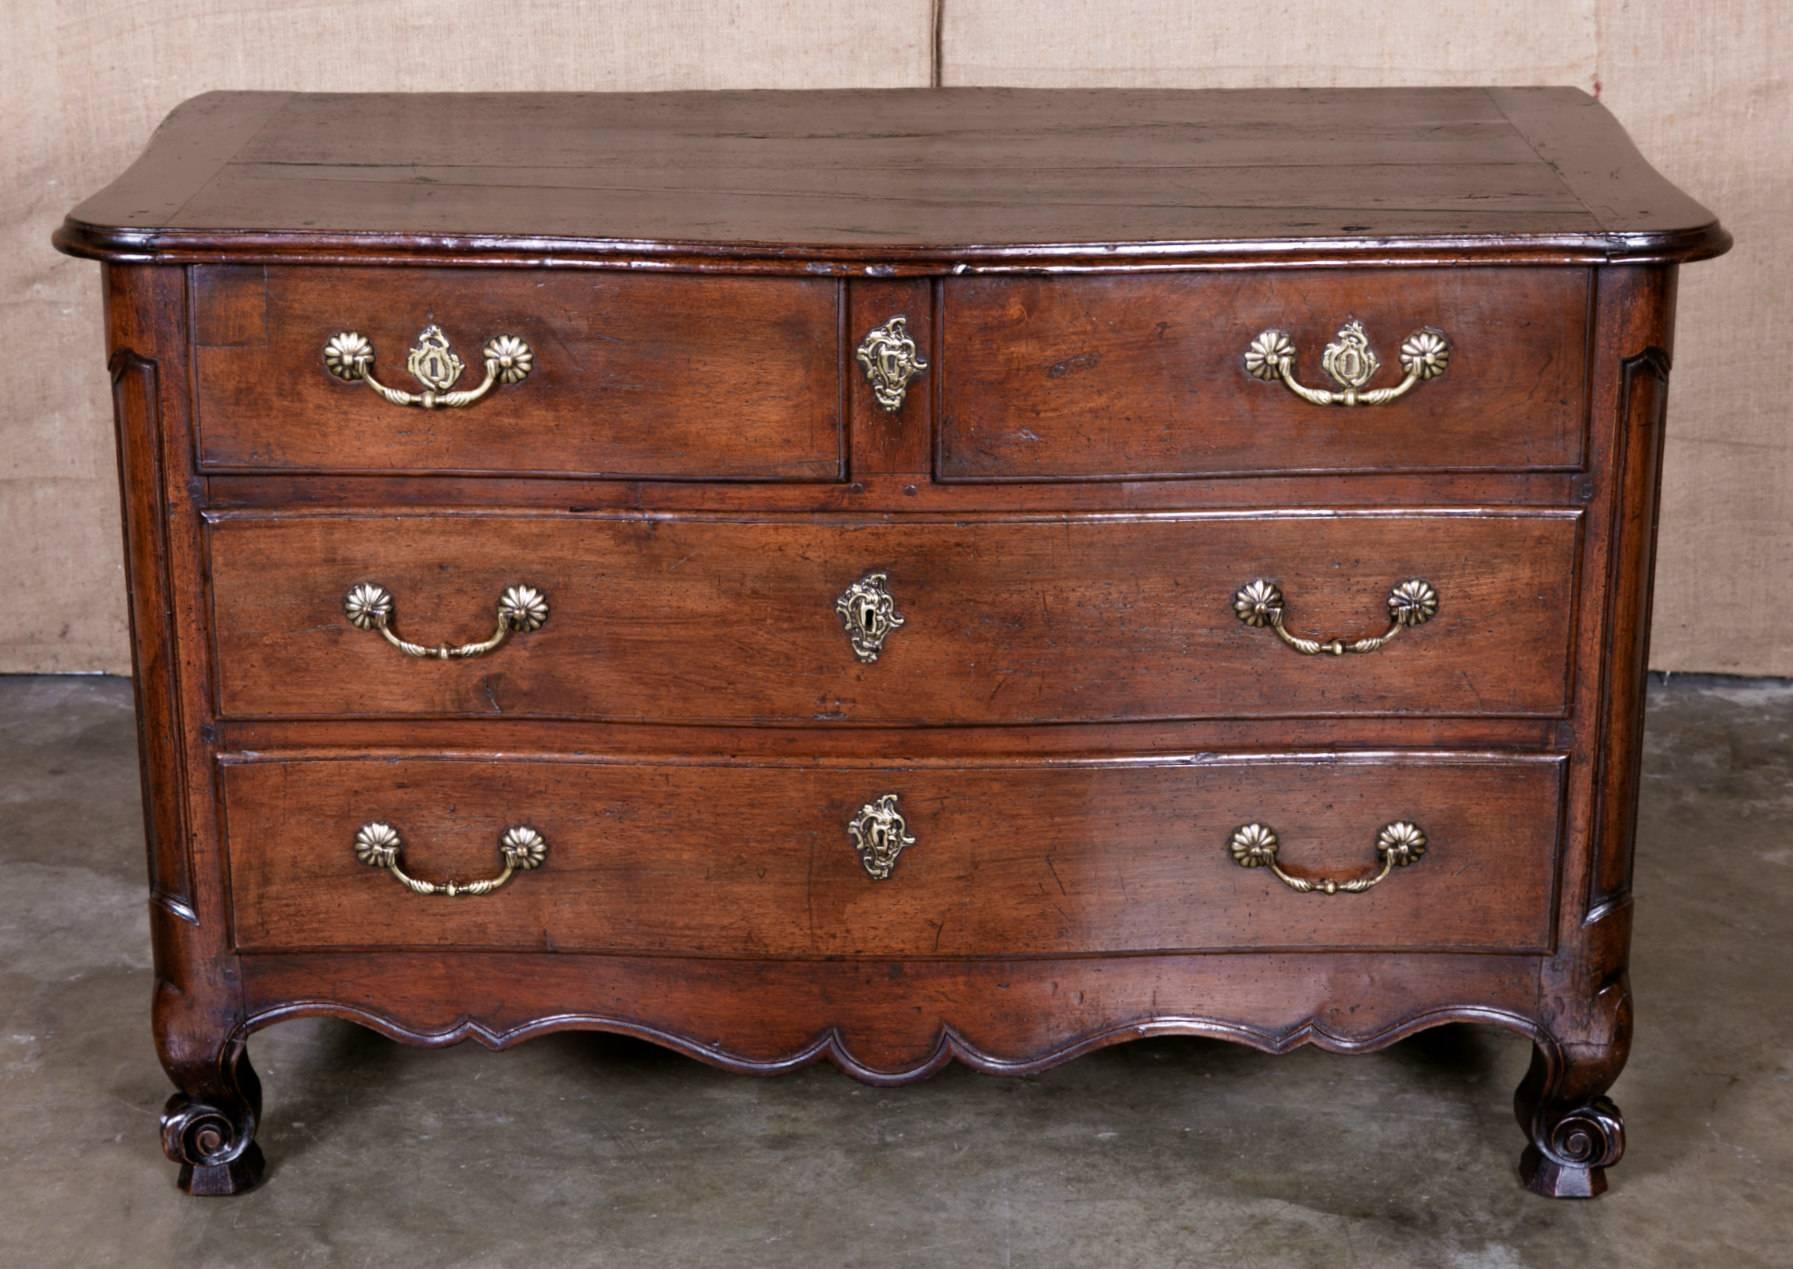 Lovely 18th century French Louis XV period commode de port handcrafted of
solid walnut by skilled artisans from the Bordeaux region of France. The arbalète shaped top displays the warm and rich patina found throughout. Four drawers, two larger